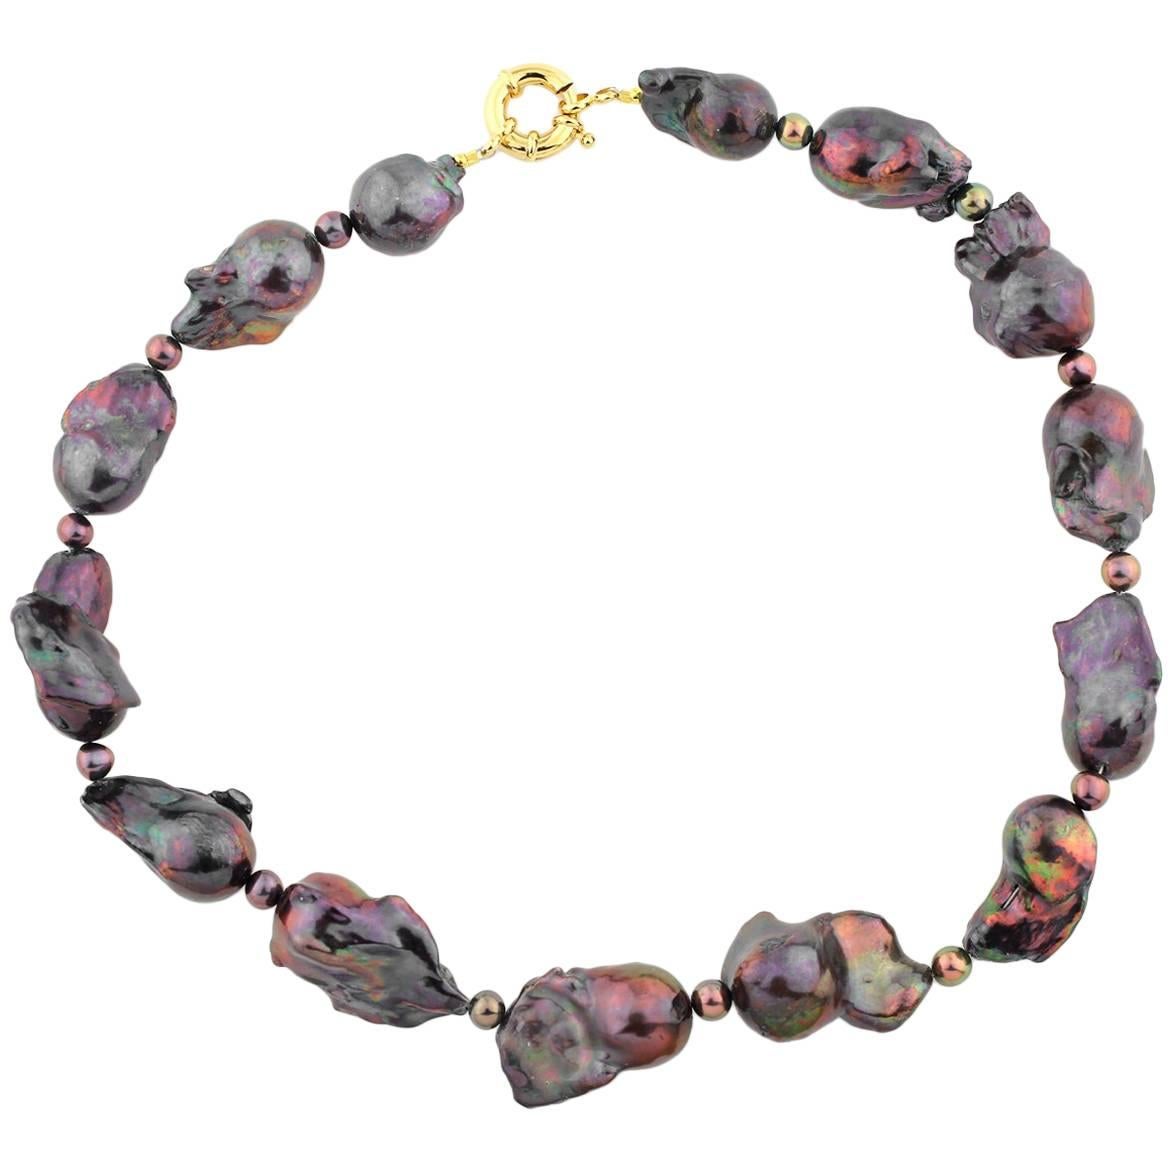 Irridescent Fireball Baroque Pearl Rainbow of Colors Necklace